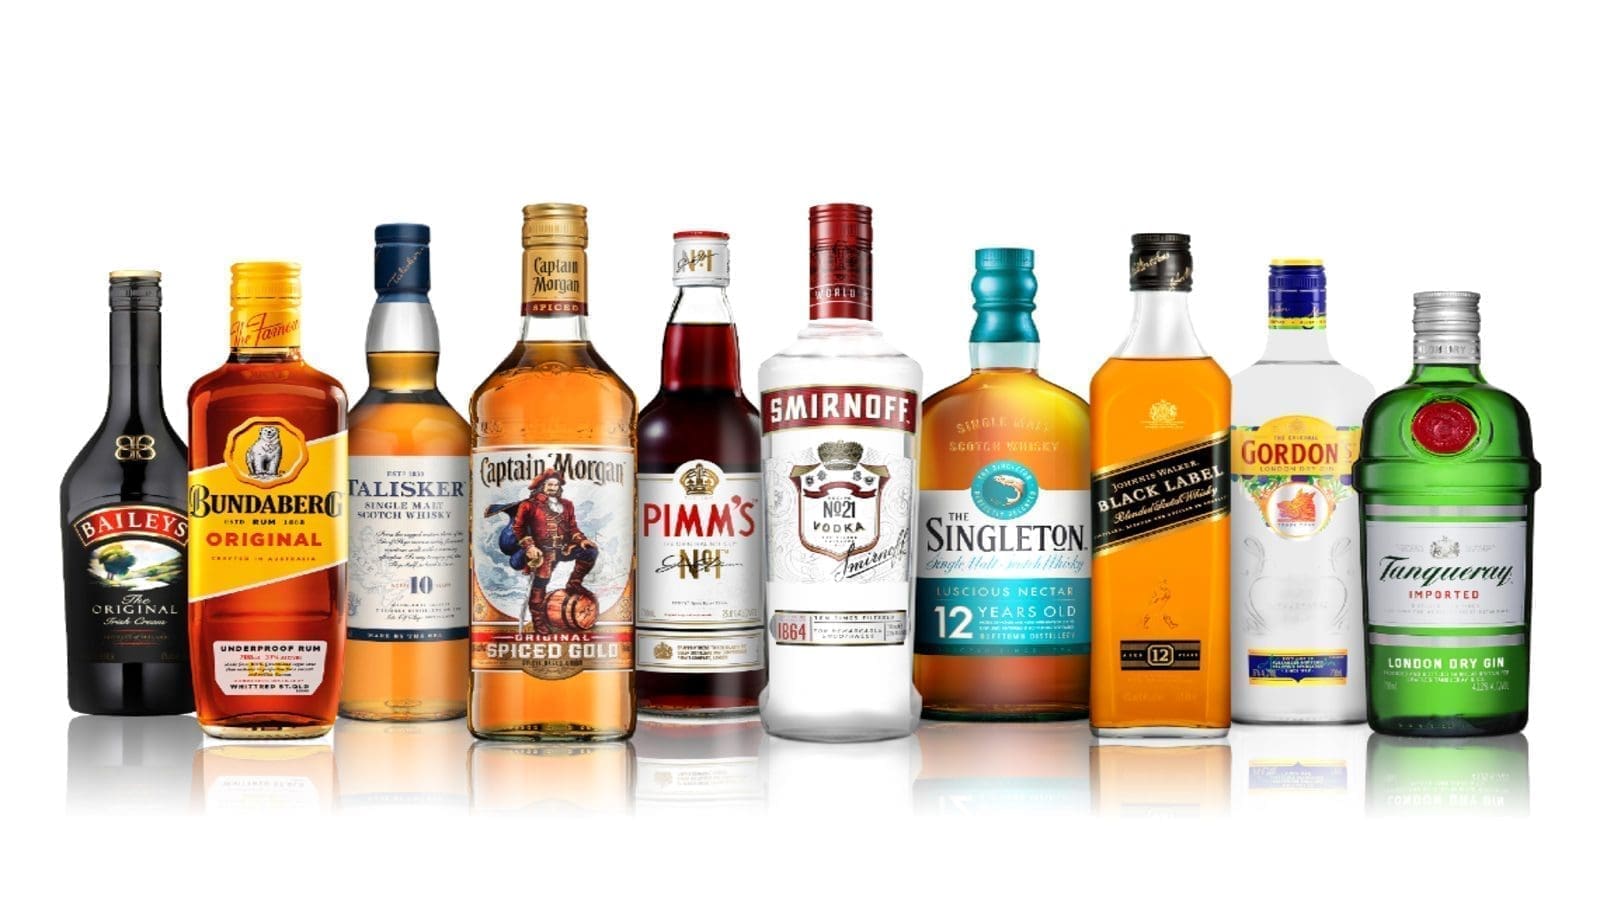 British alcoholic beverage giant Diageo to exit Russia before the end of the year